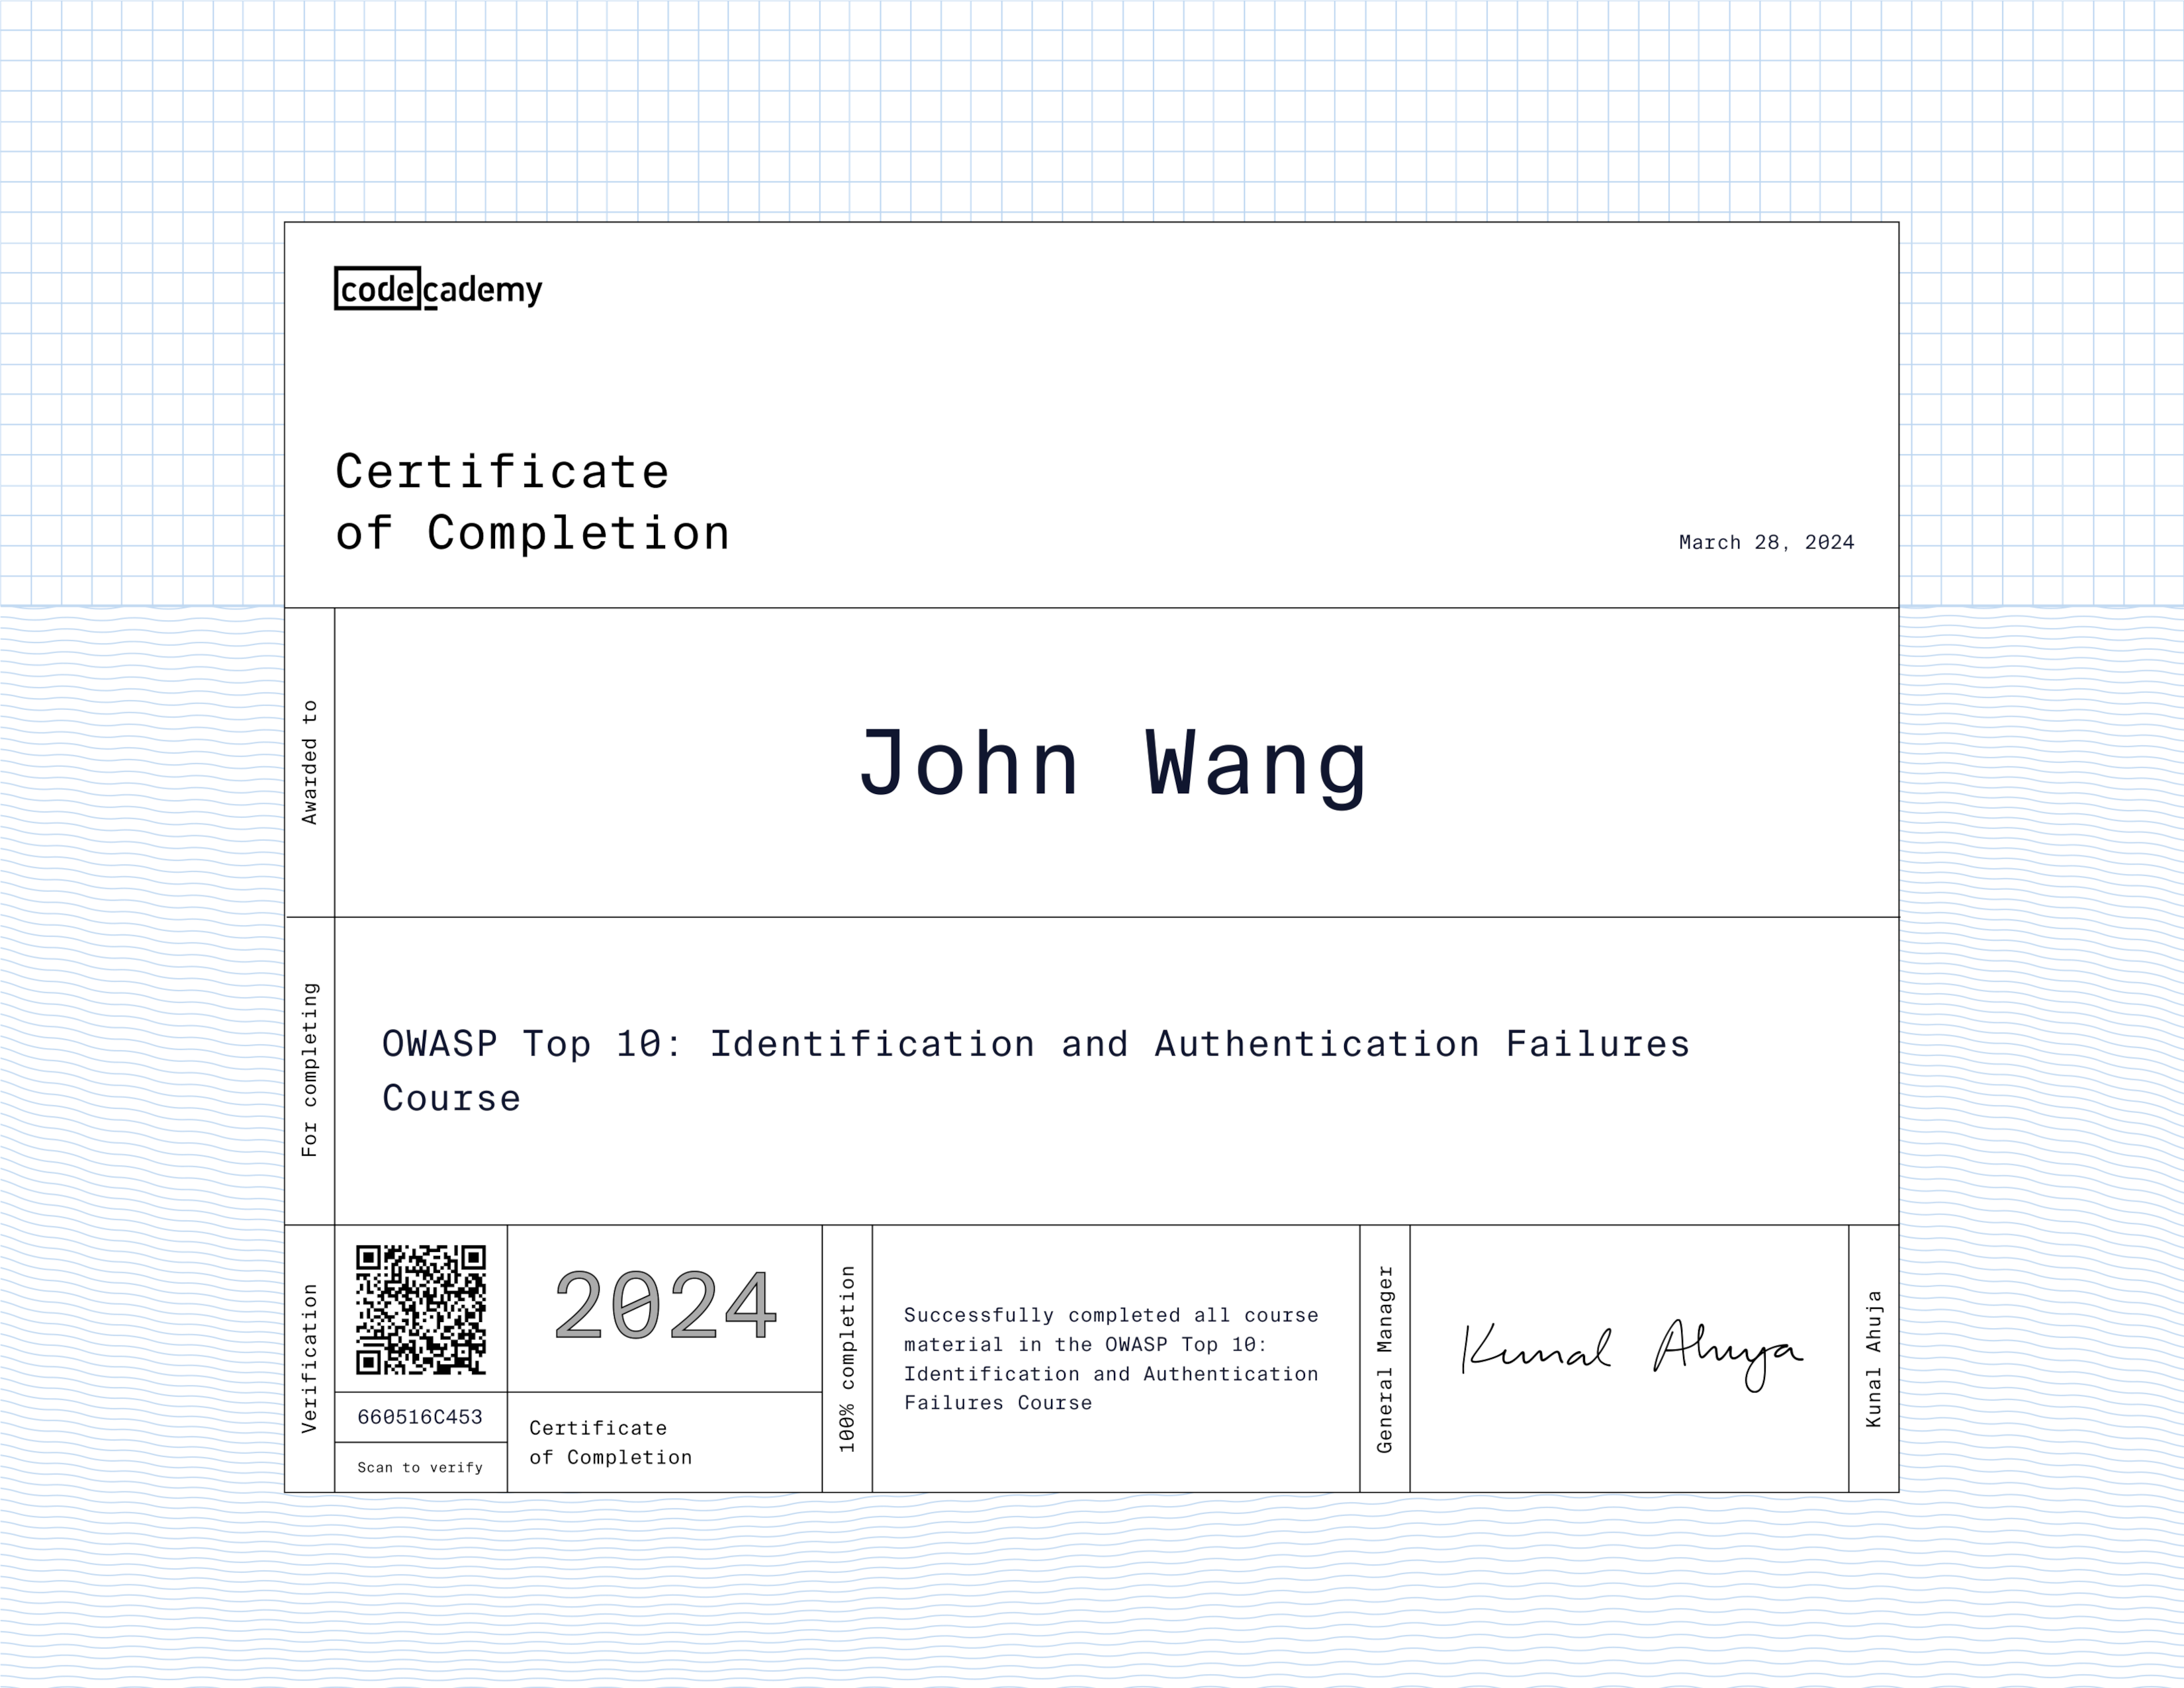 John's OWASP Top 10: Identification and Authentication Failures from Codecademy